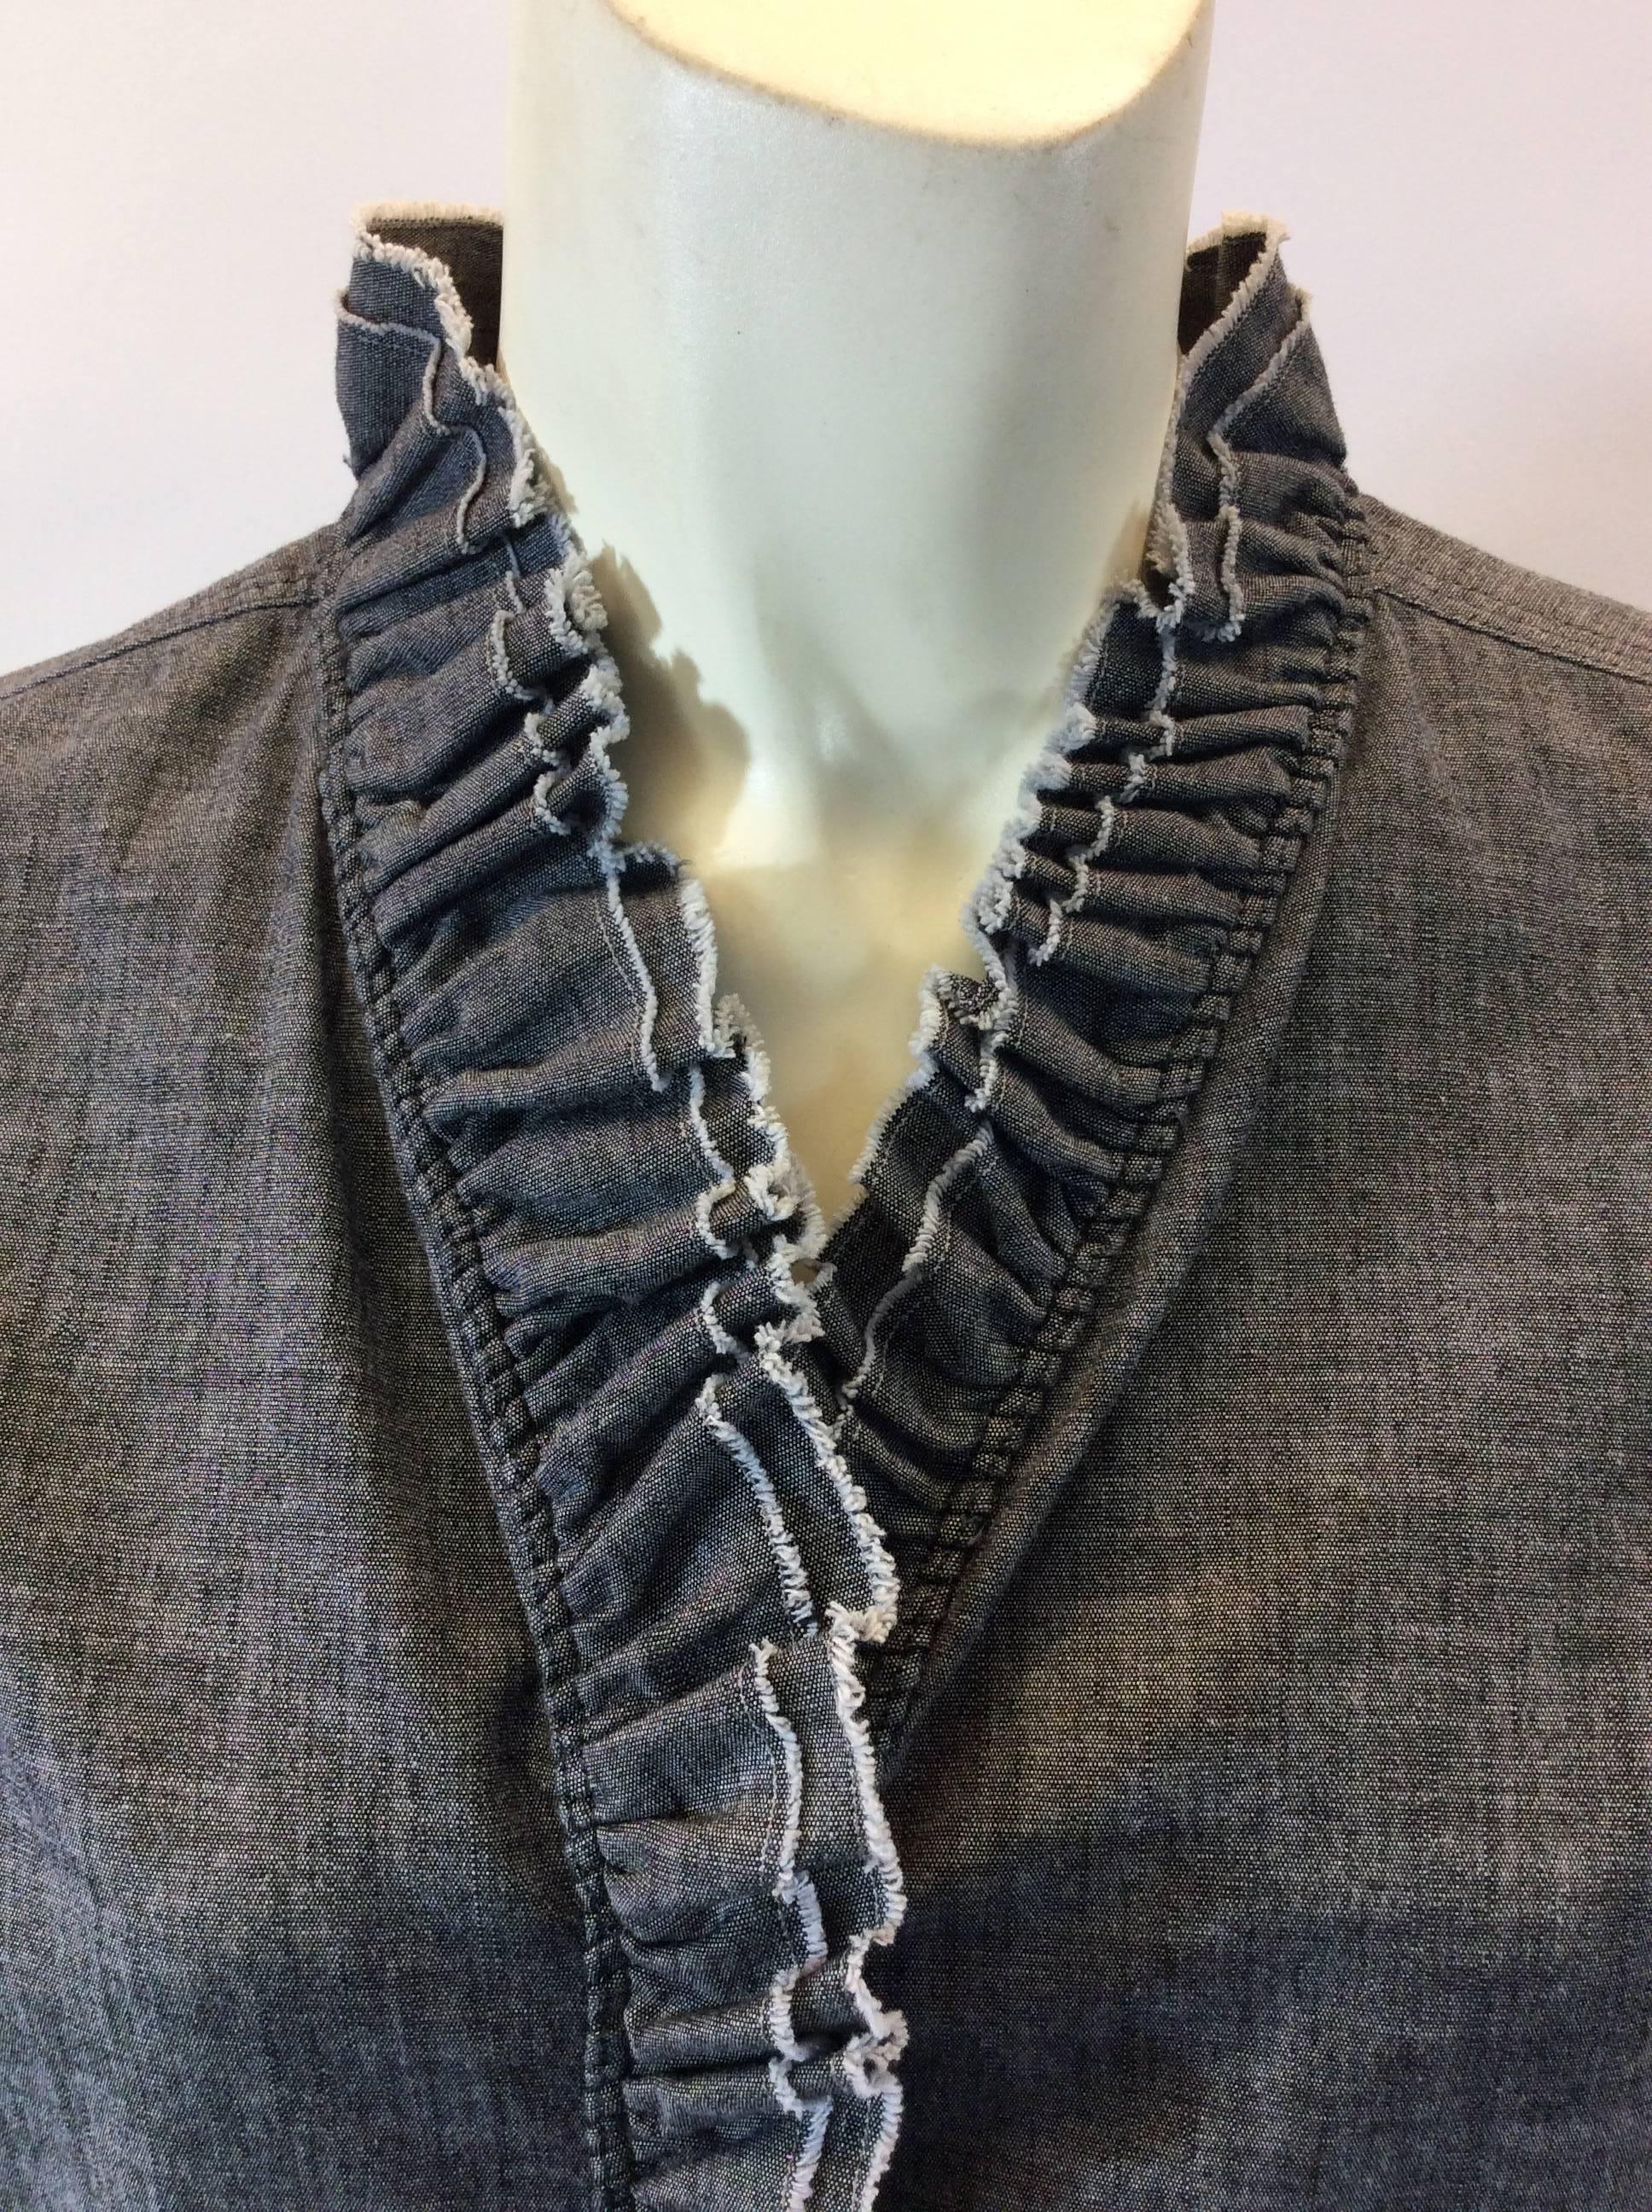 Isabel Marant Grey Button Down Blouse In Excellent Condition For Sale In Narberth, PA